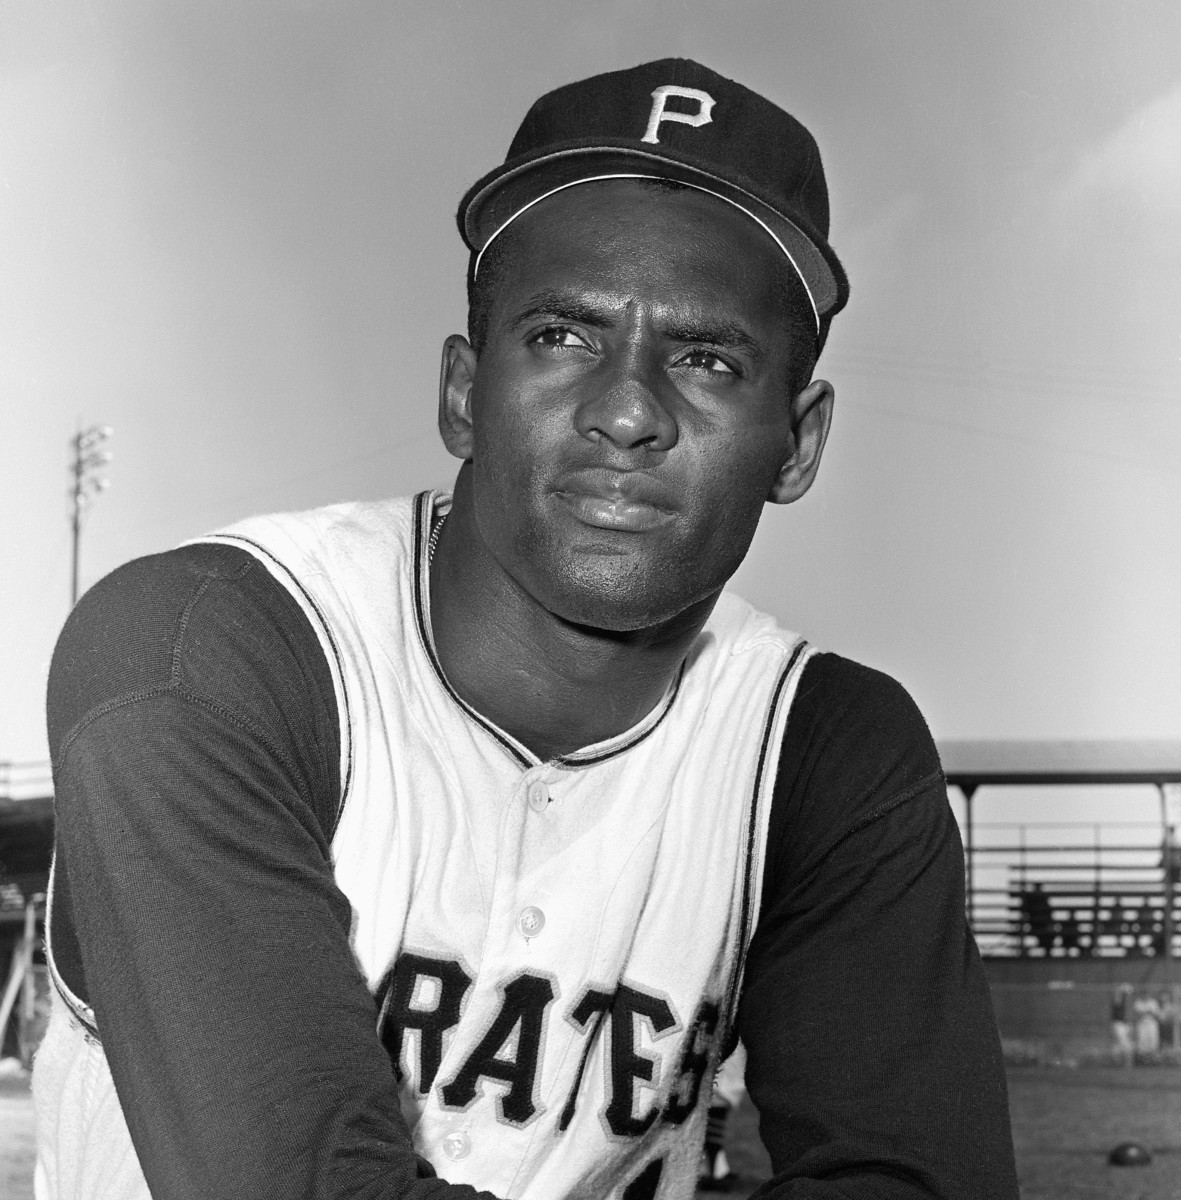 Hall of Famer Roberto Clemente, who died in a plane crash at age 38, left an indelible mark on the game and trading card market.